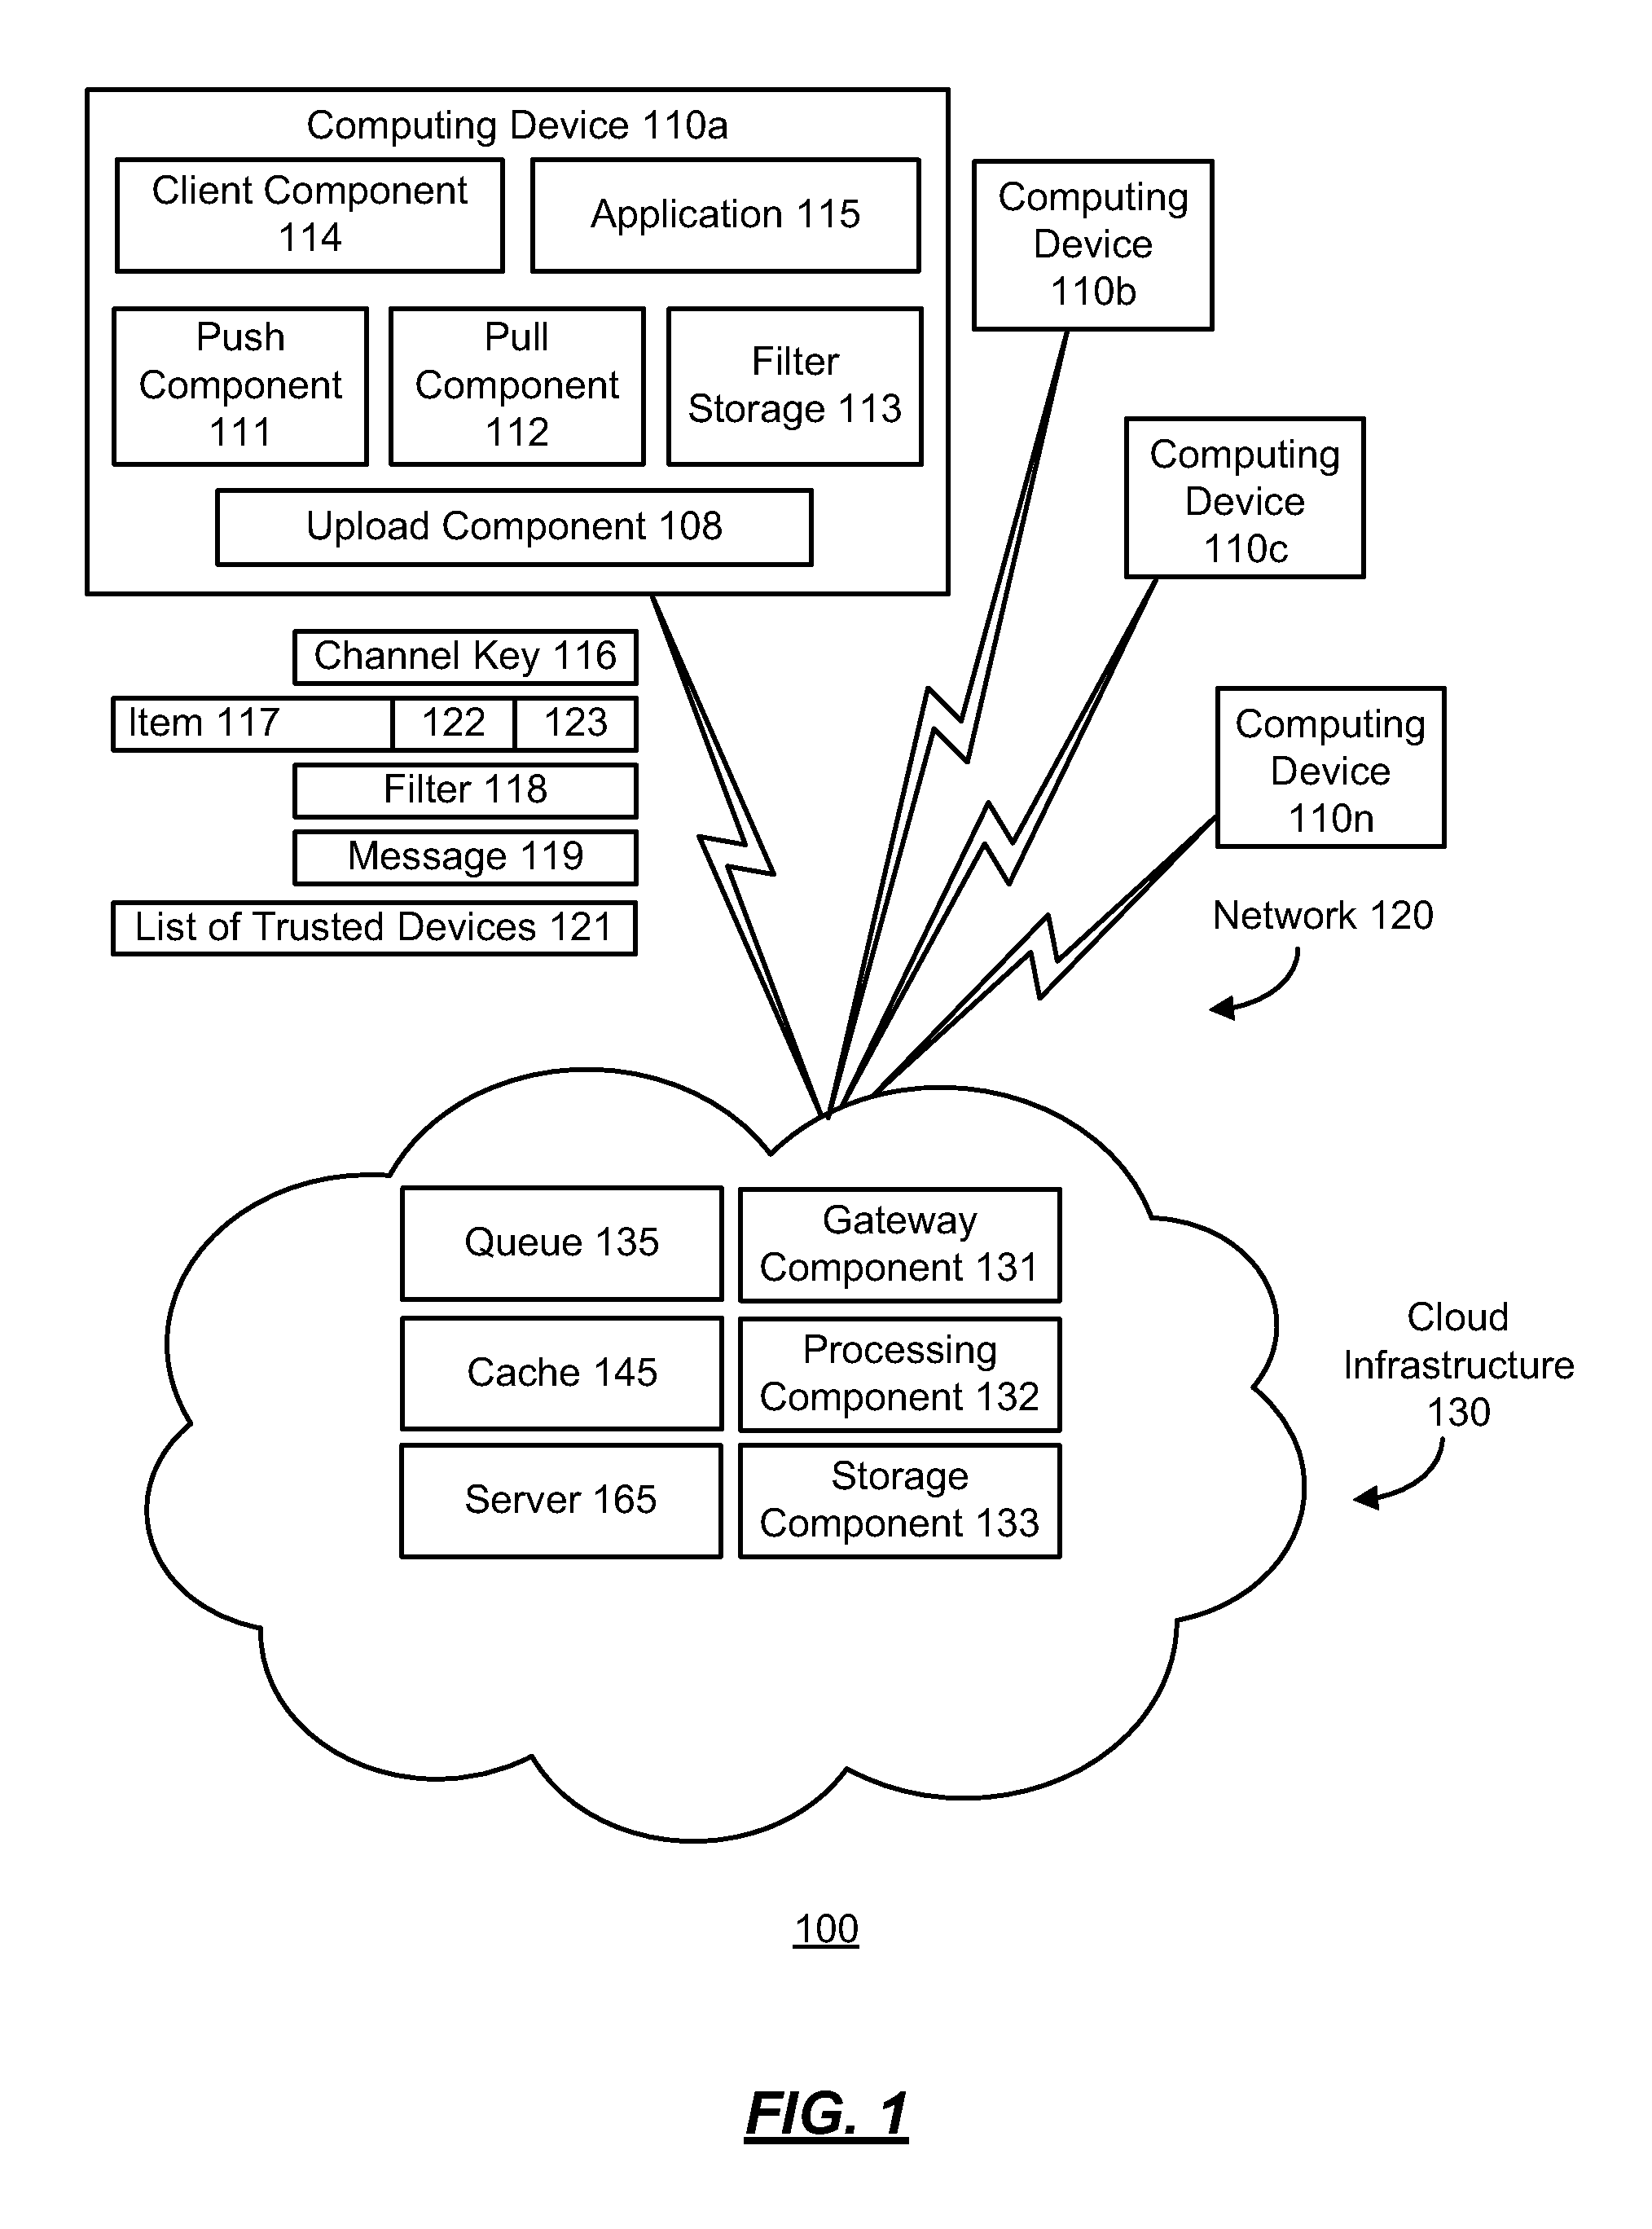 Communicating using a cloud infrastructure